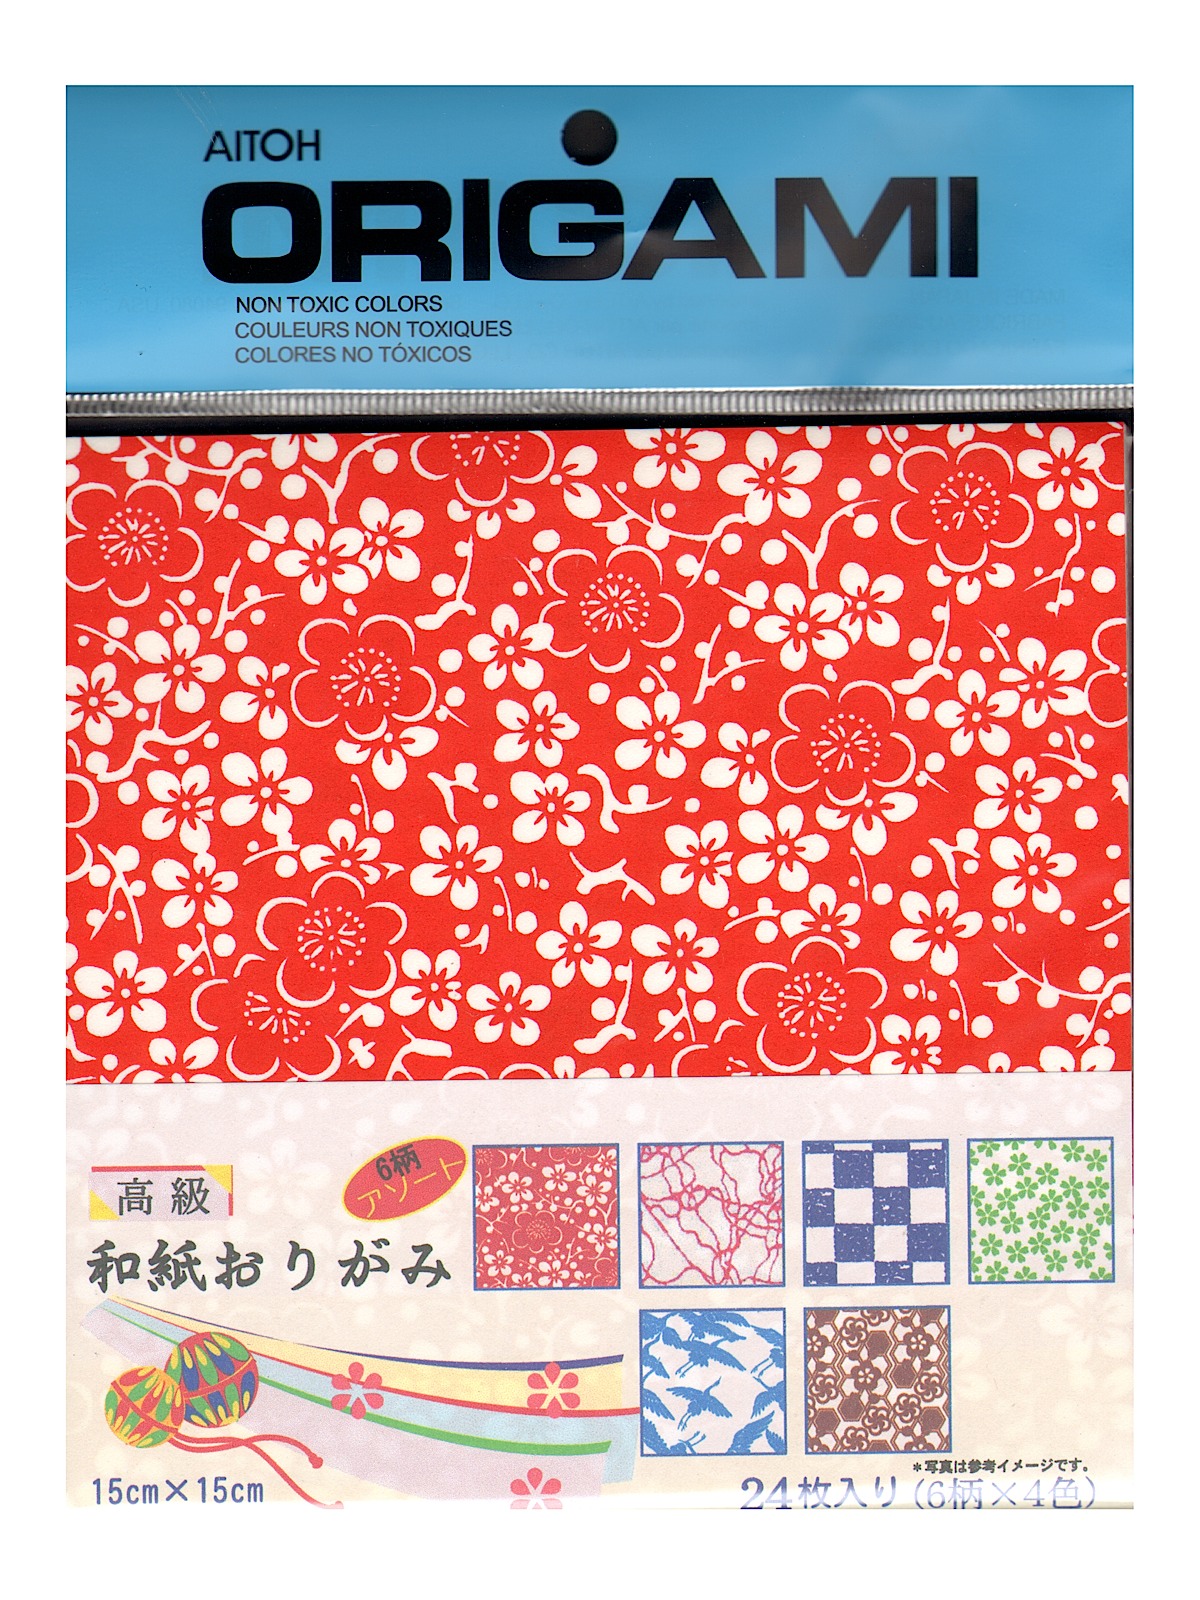 Origami Paper 5 7 8 In. X 5 7 8 In. Washi Chiyogami Pattern 24 Sheets